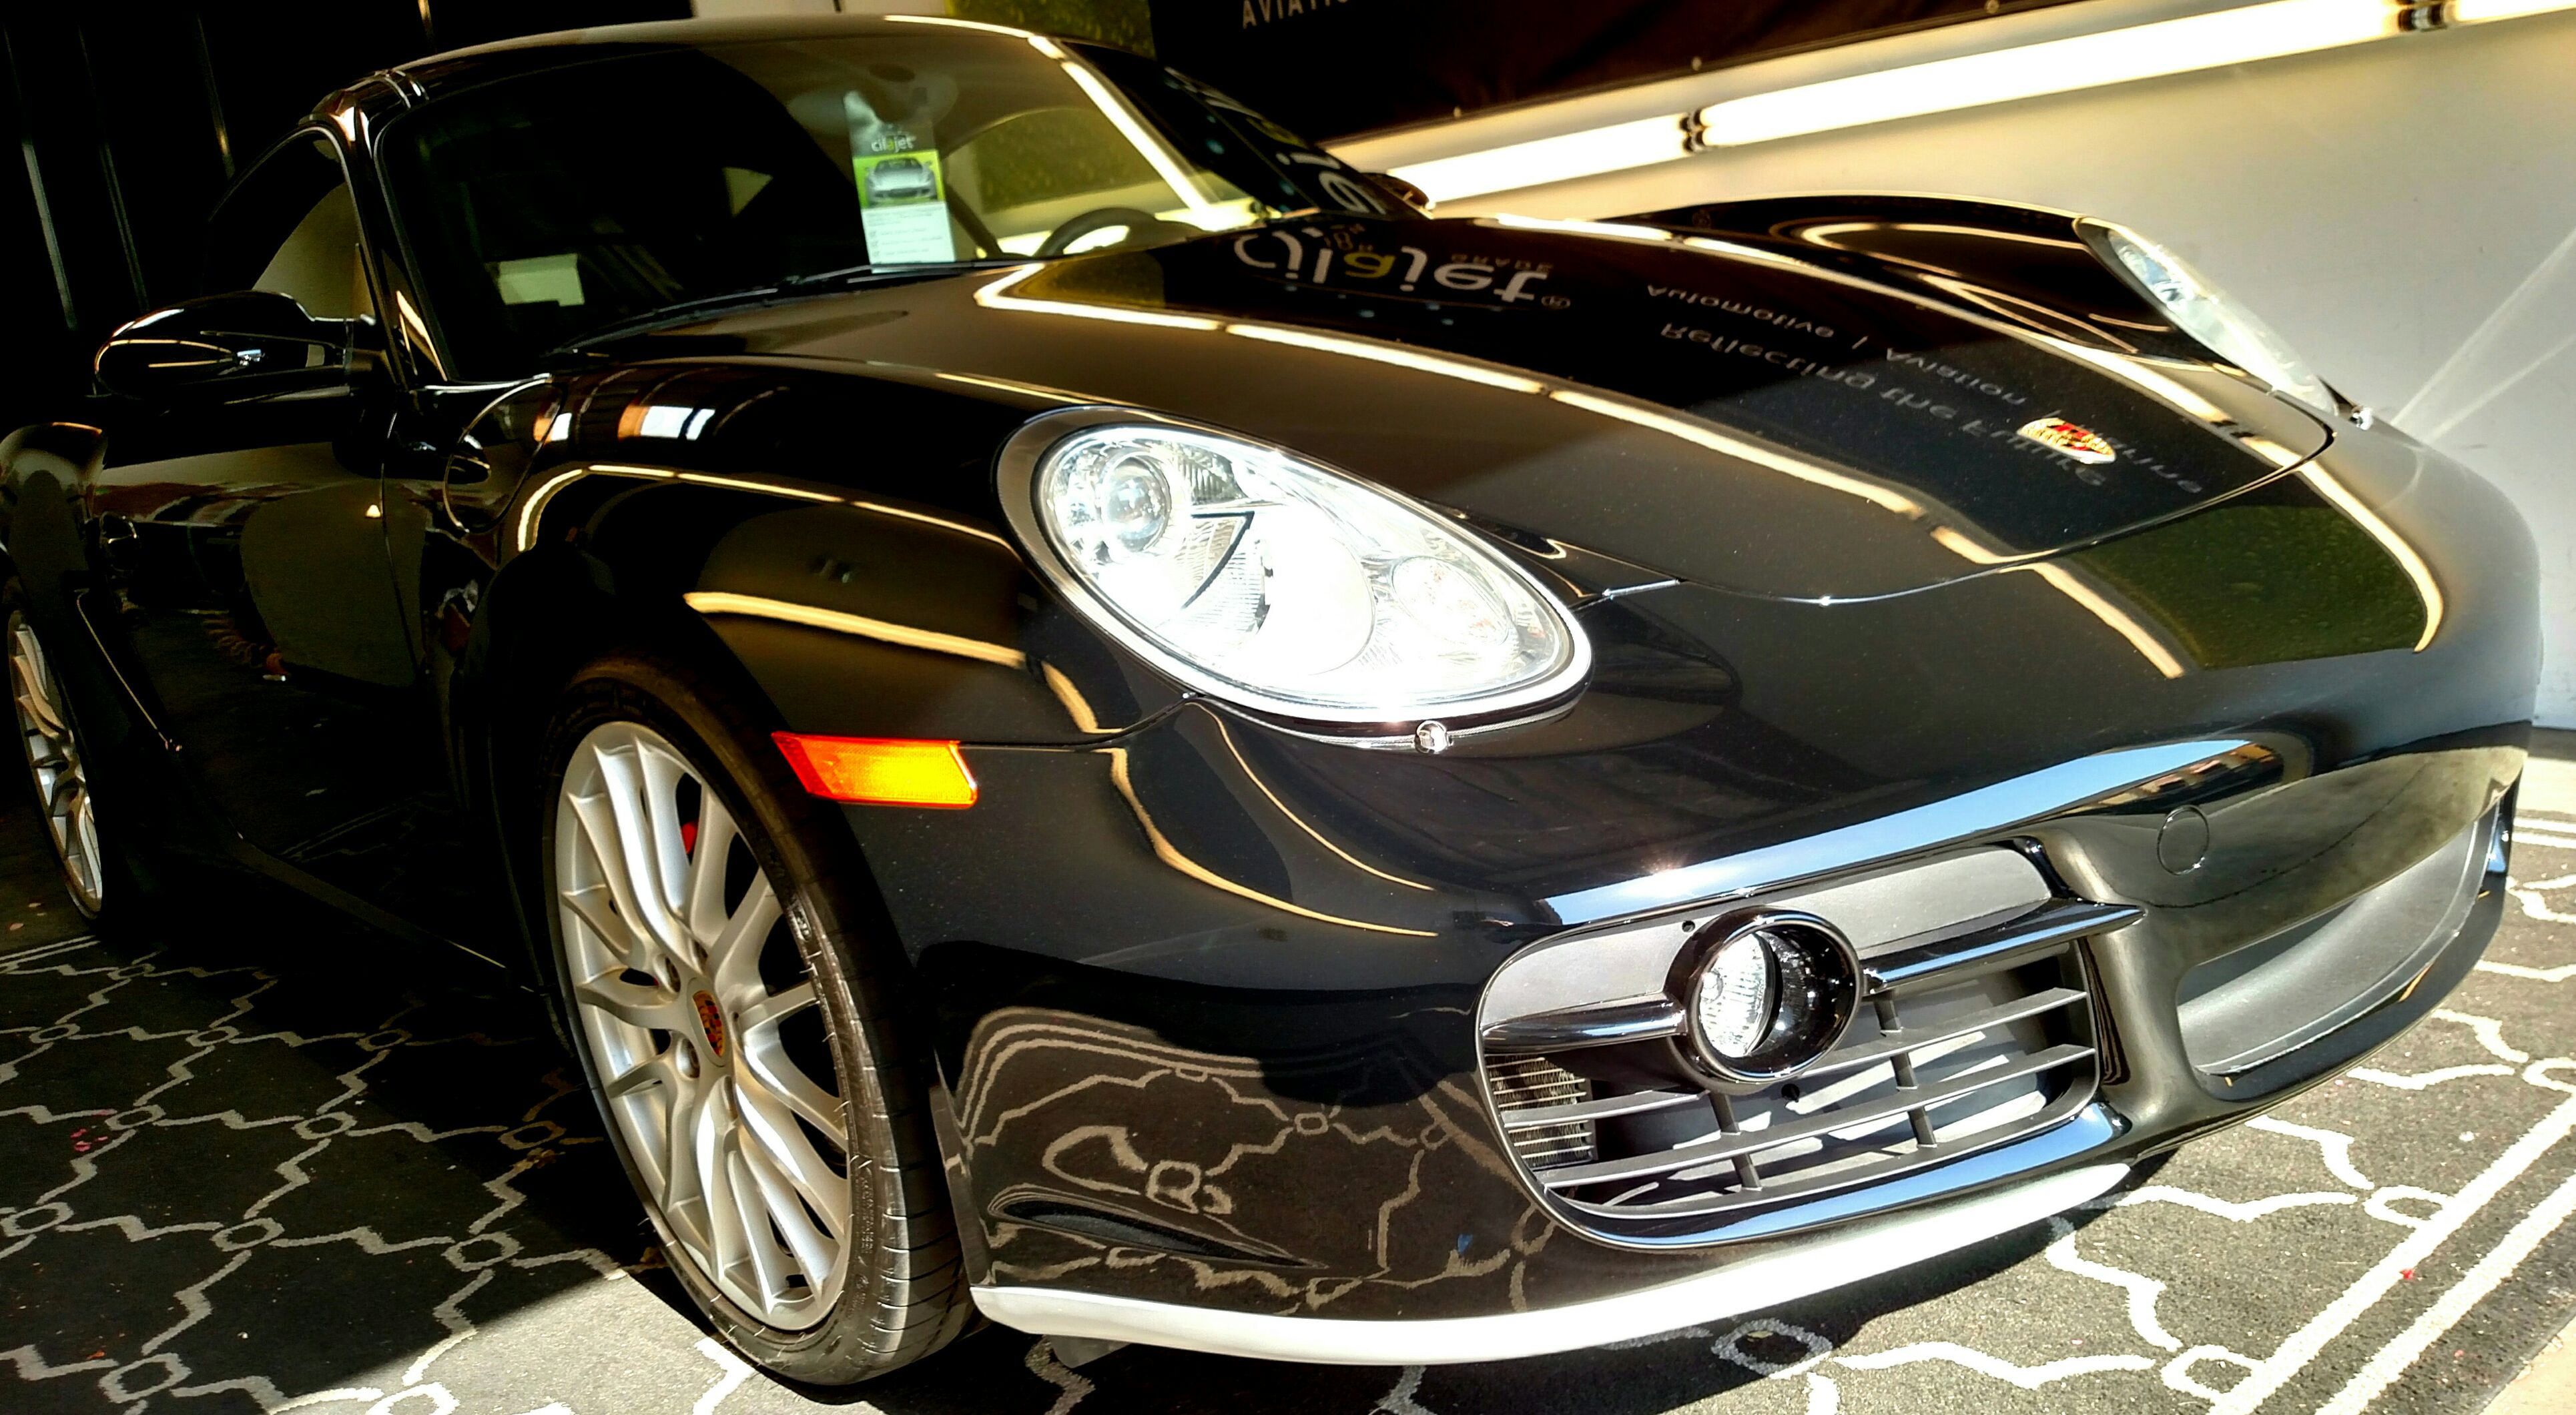 Car detailing with cilajet – It is simply the best!